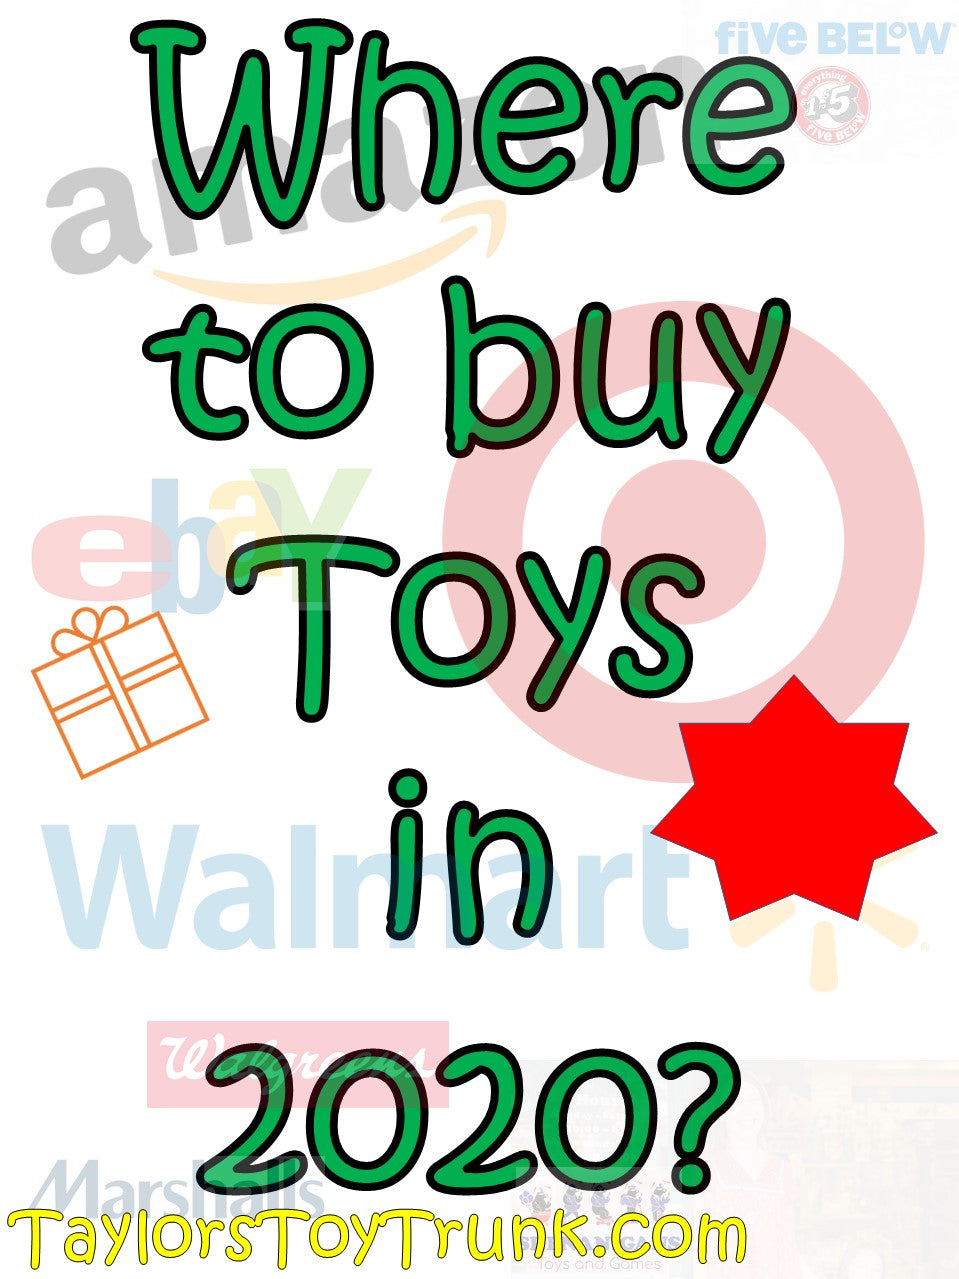 clearance toys under $10